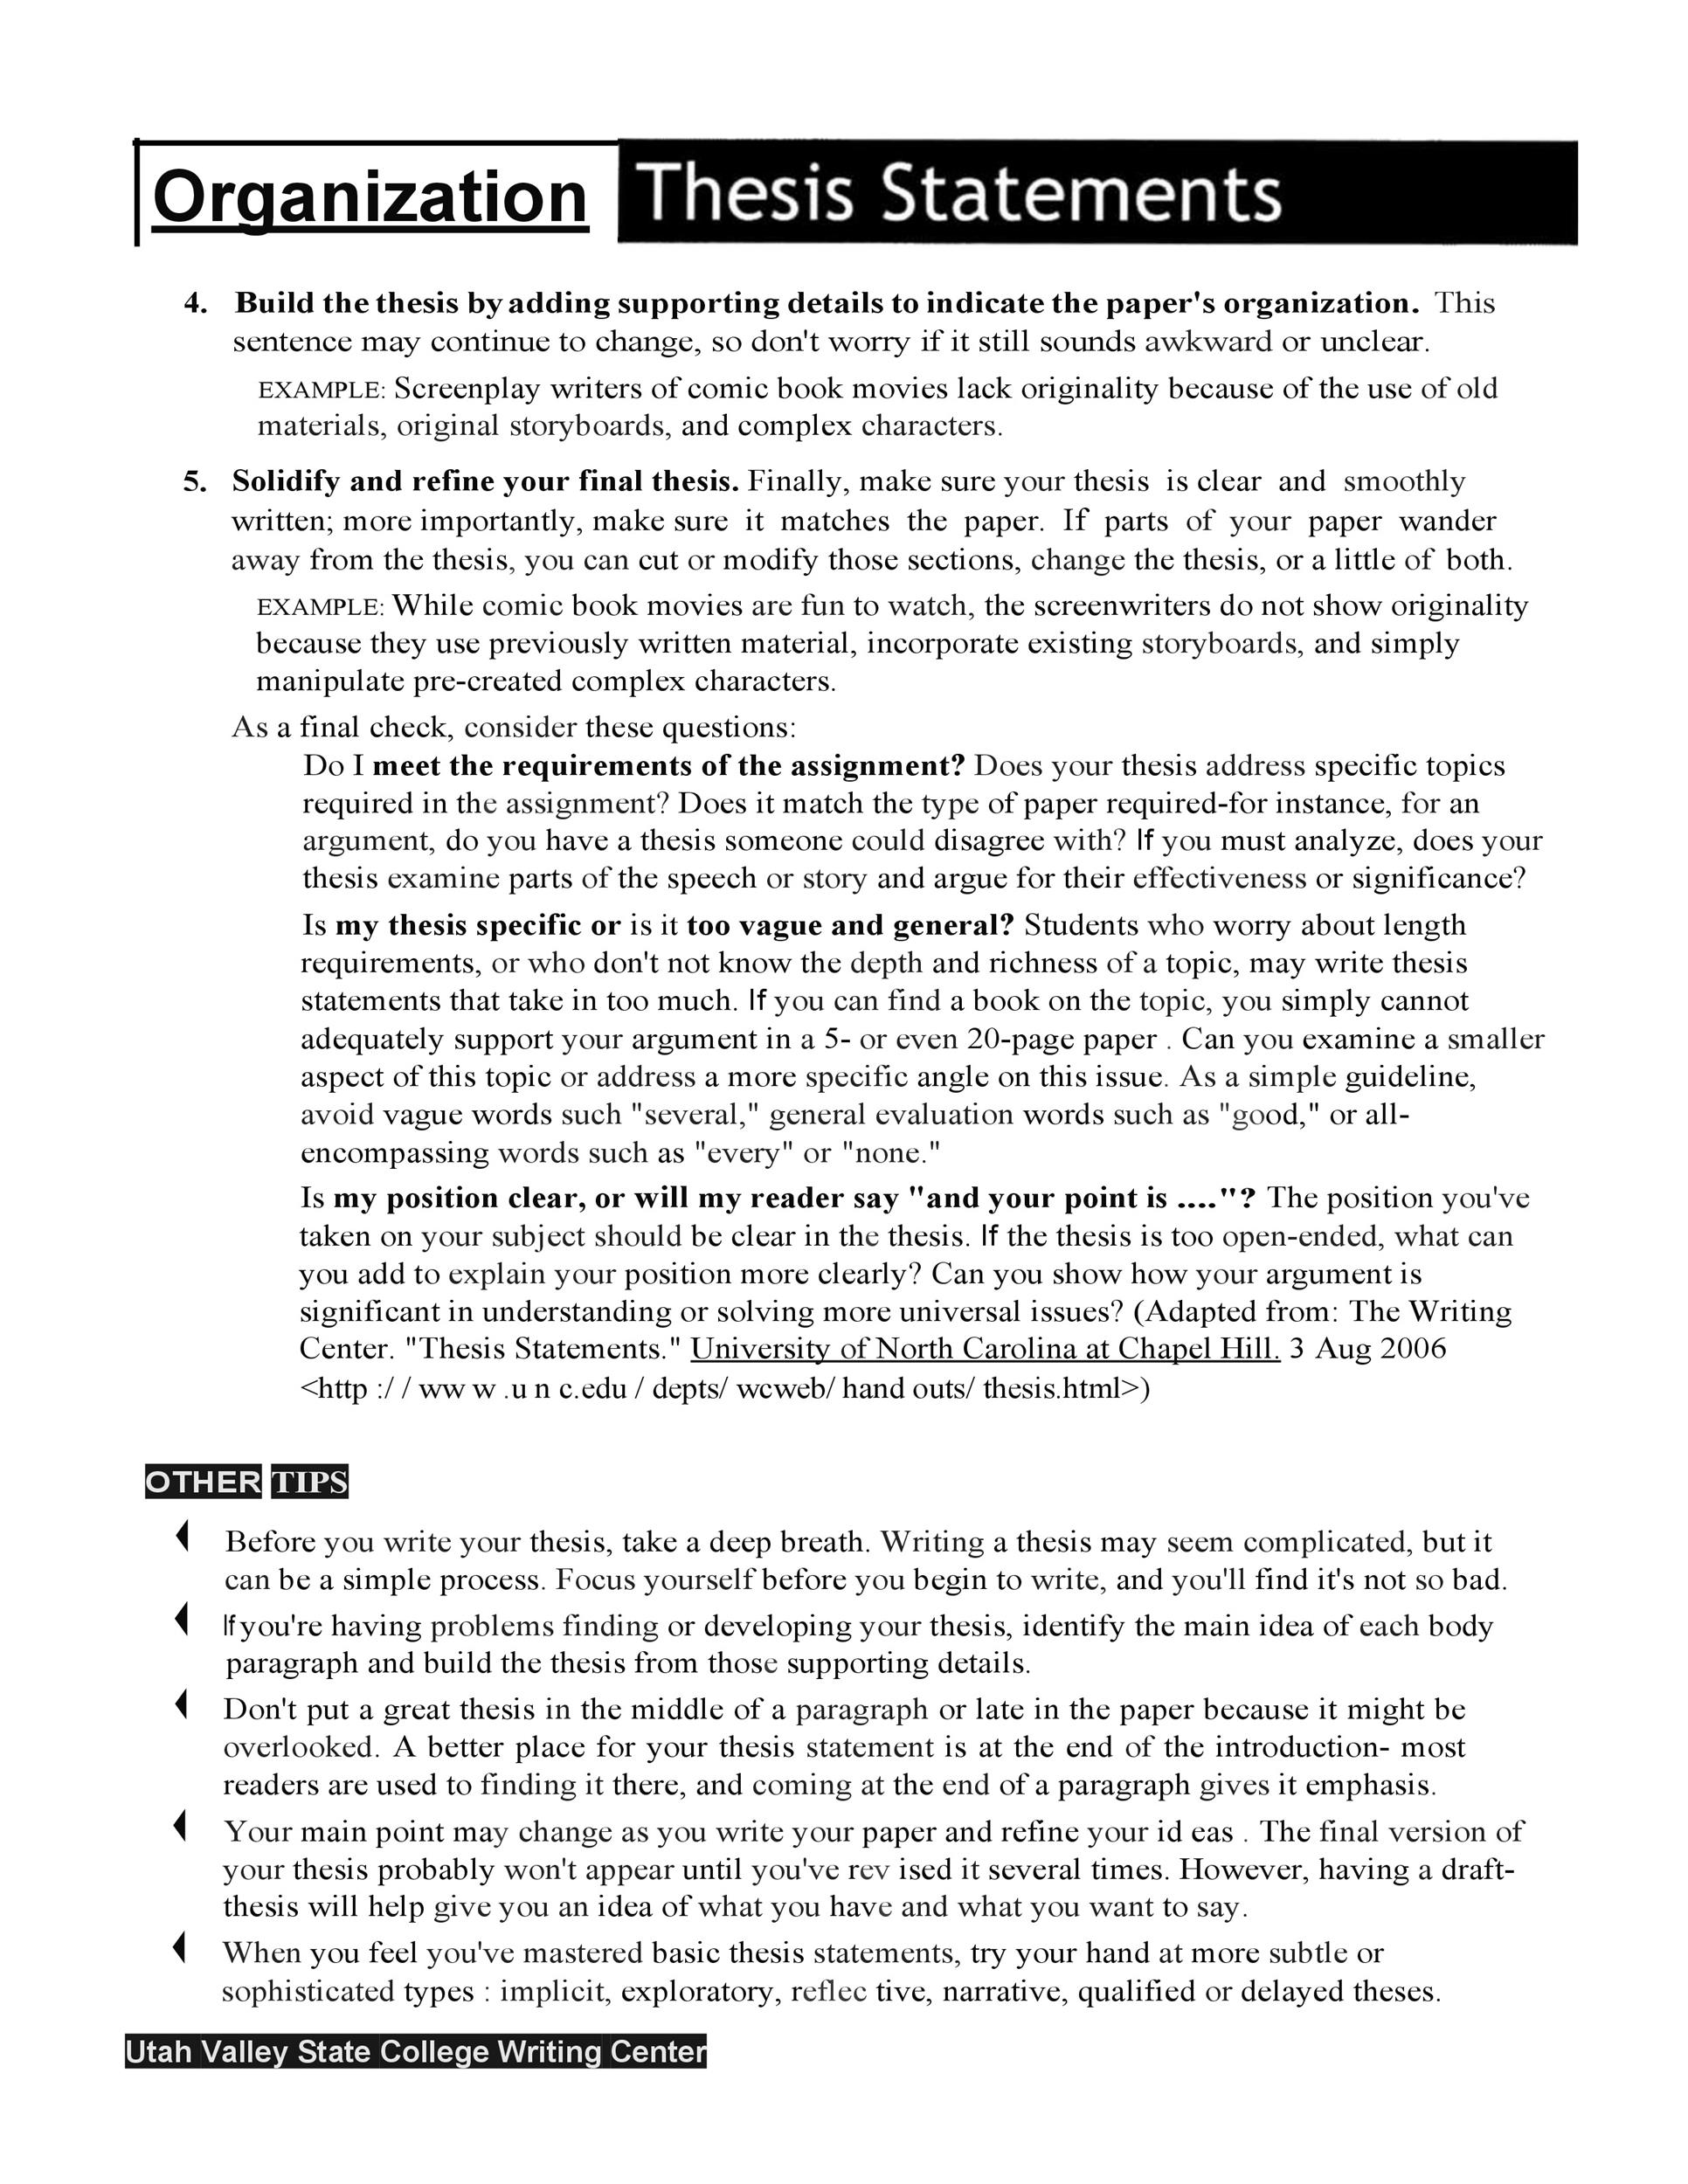 Free thesis statement template 18